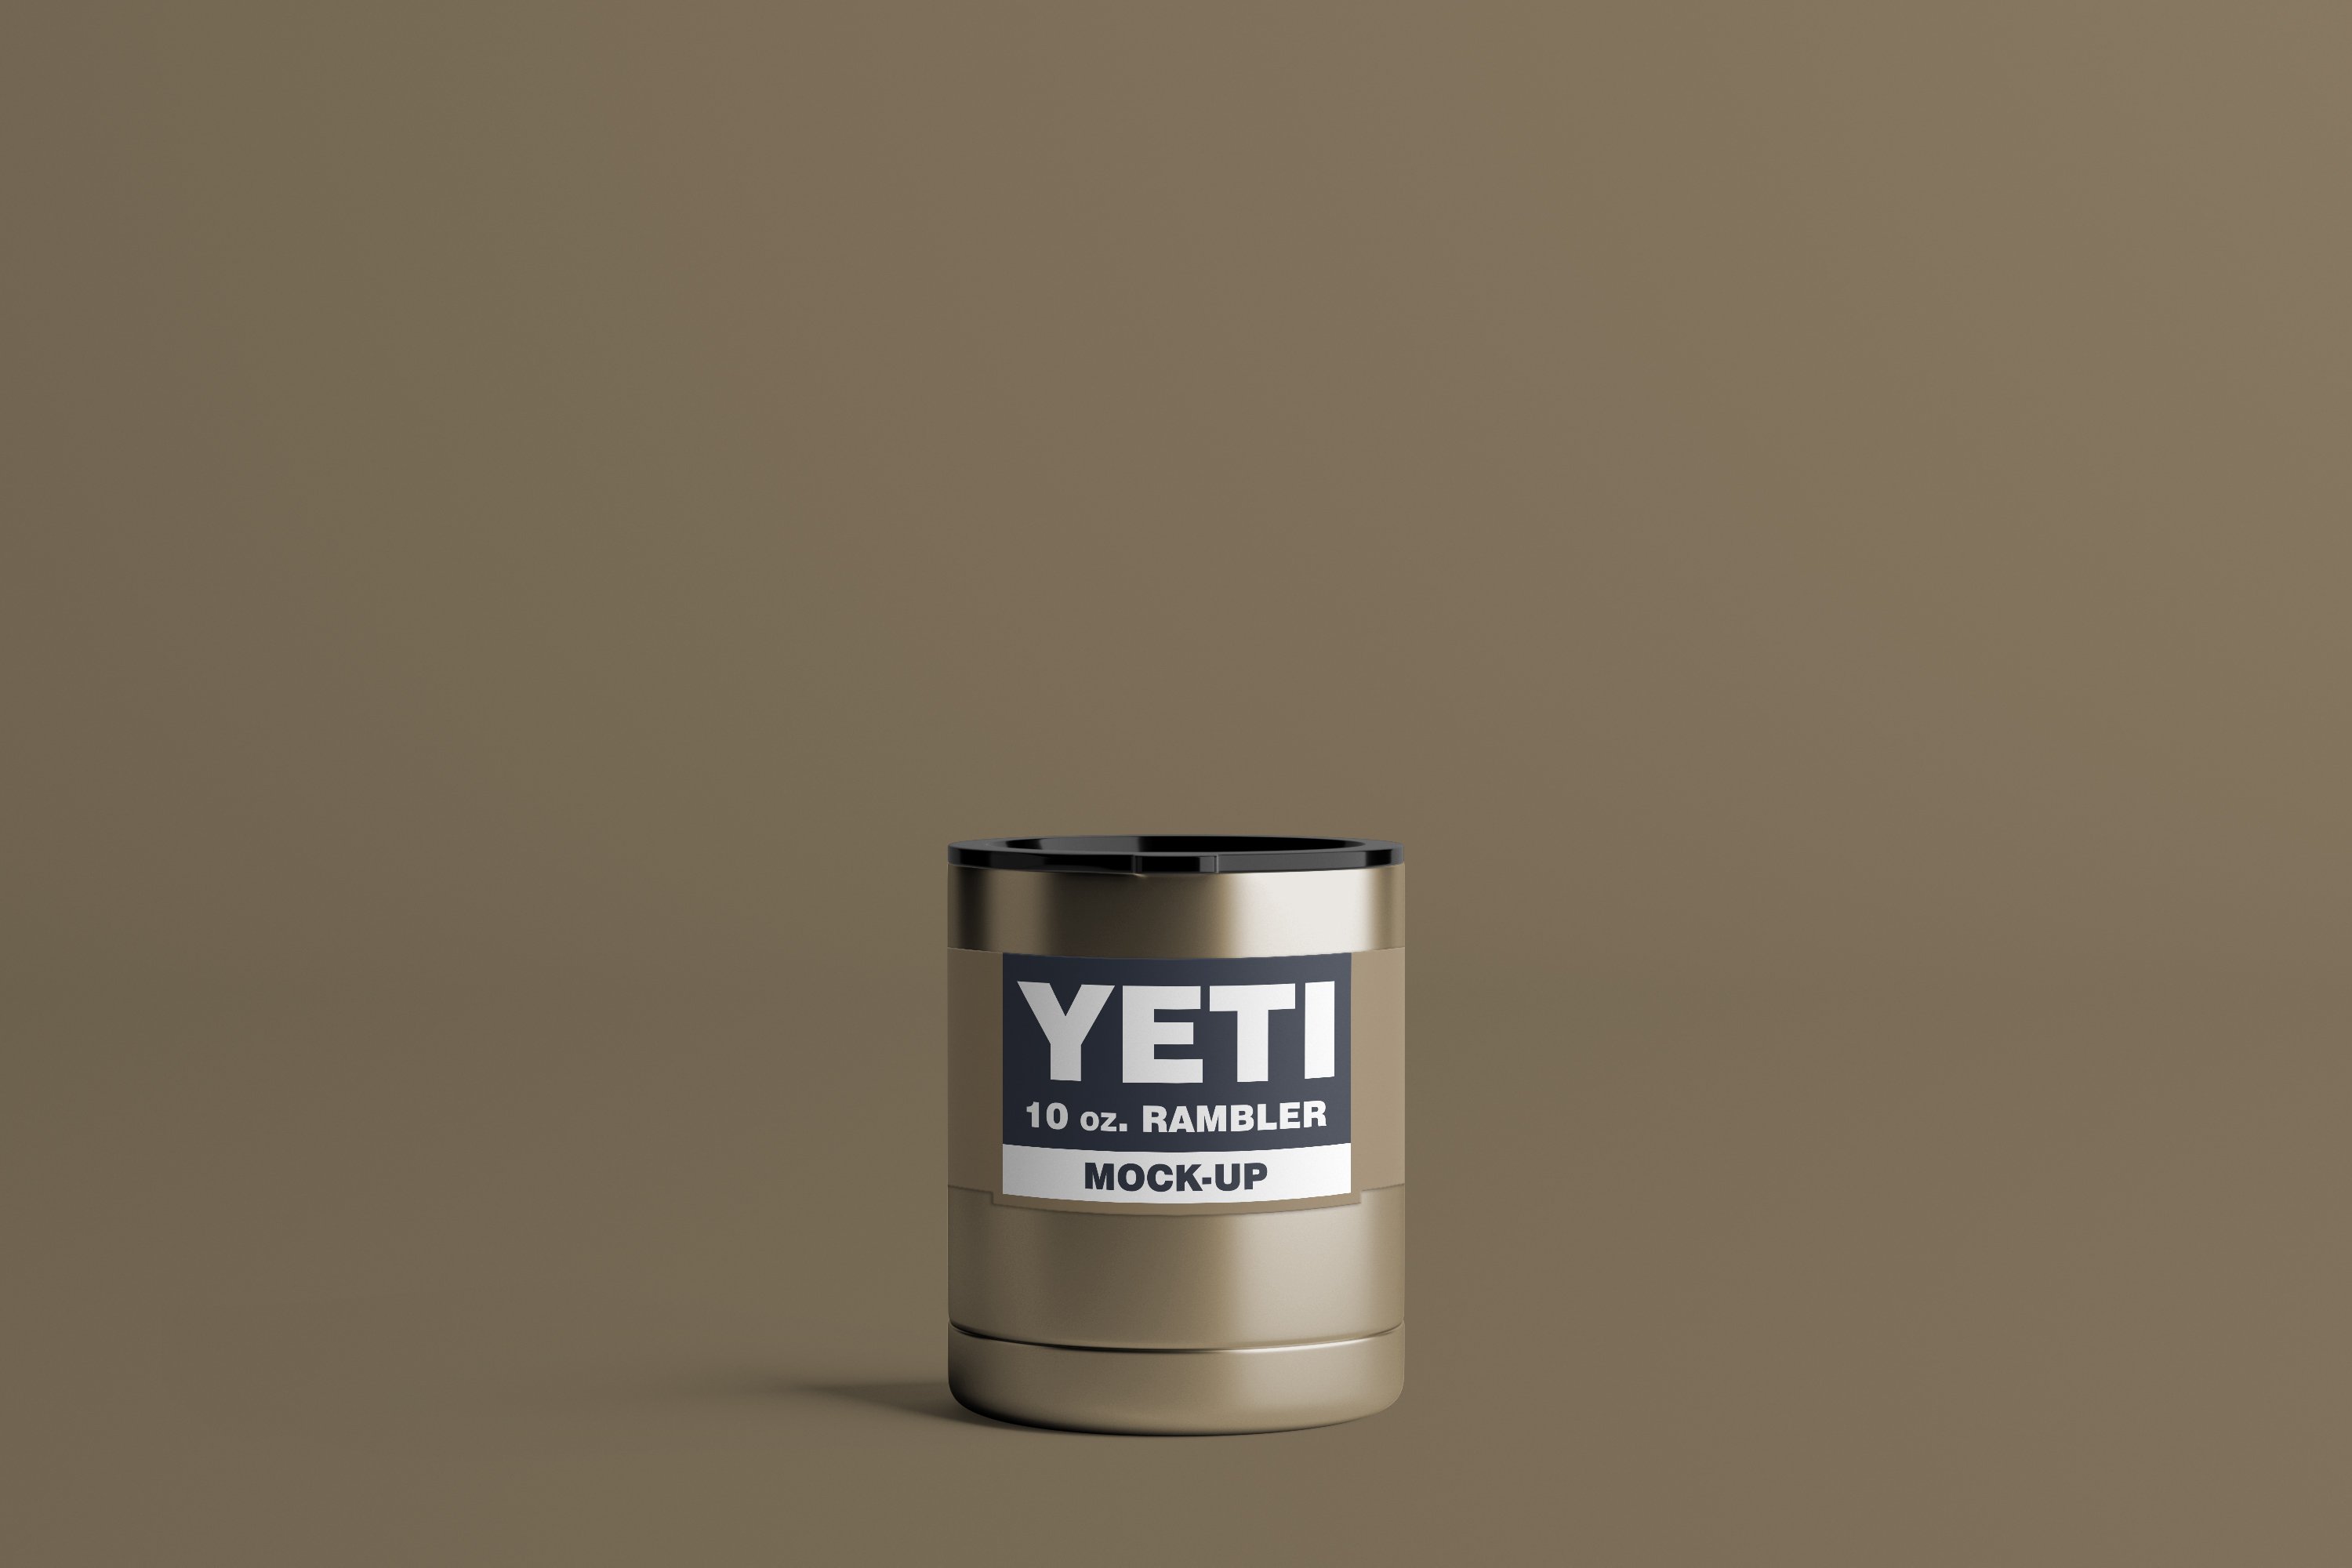 One small gold yeti cup.